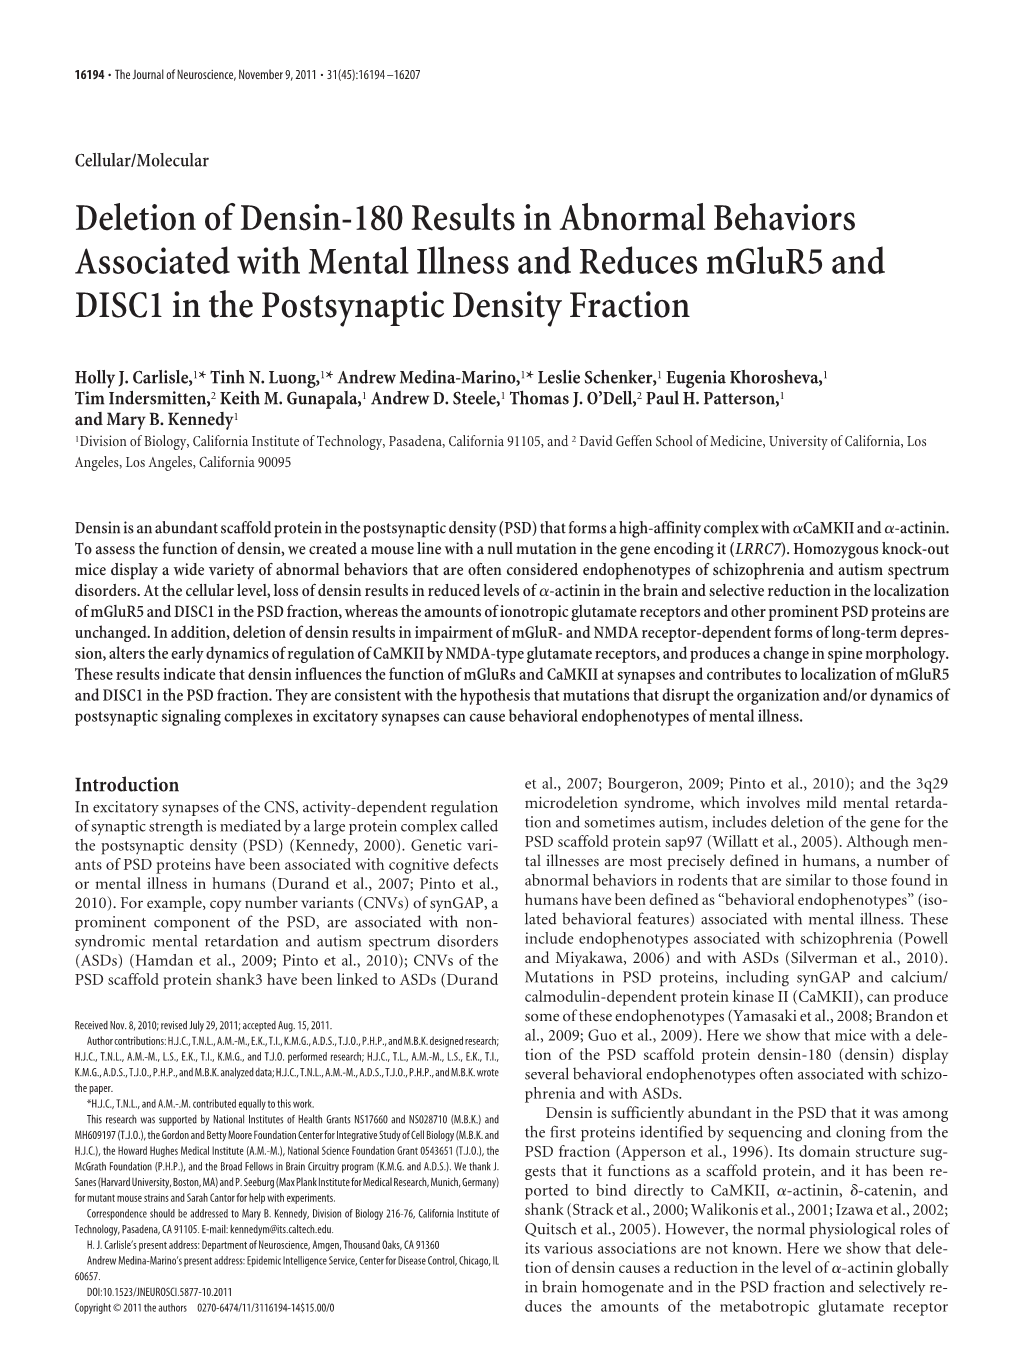 Deletion of Densin-180 Results in Abnormal Behaviors Associated with Mental Illness and Reduces Mglur5 and DISC1 in the Postsynaptic Density Fraction